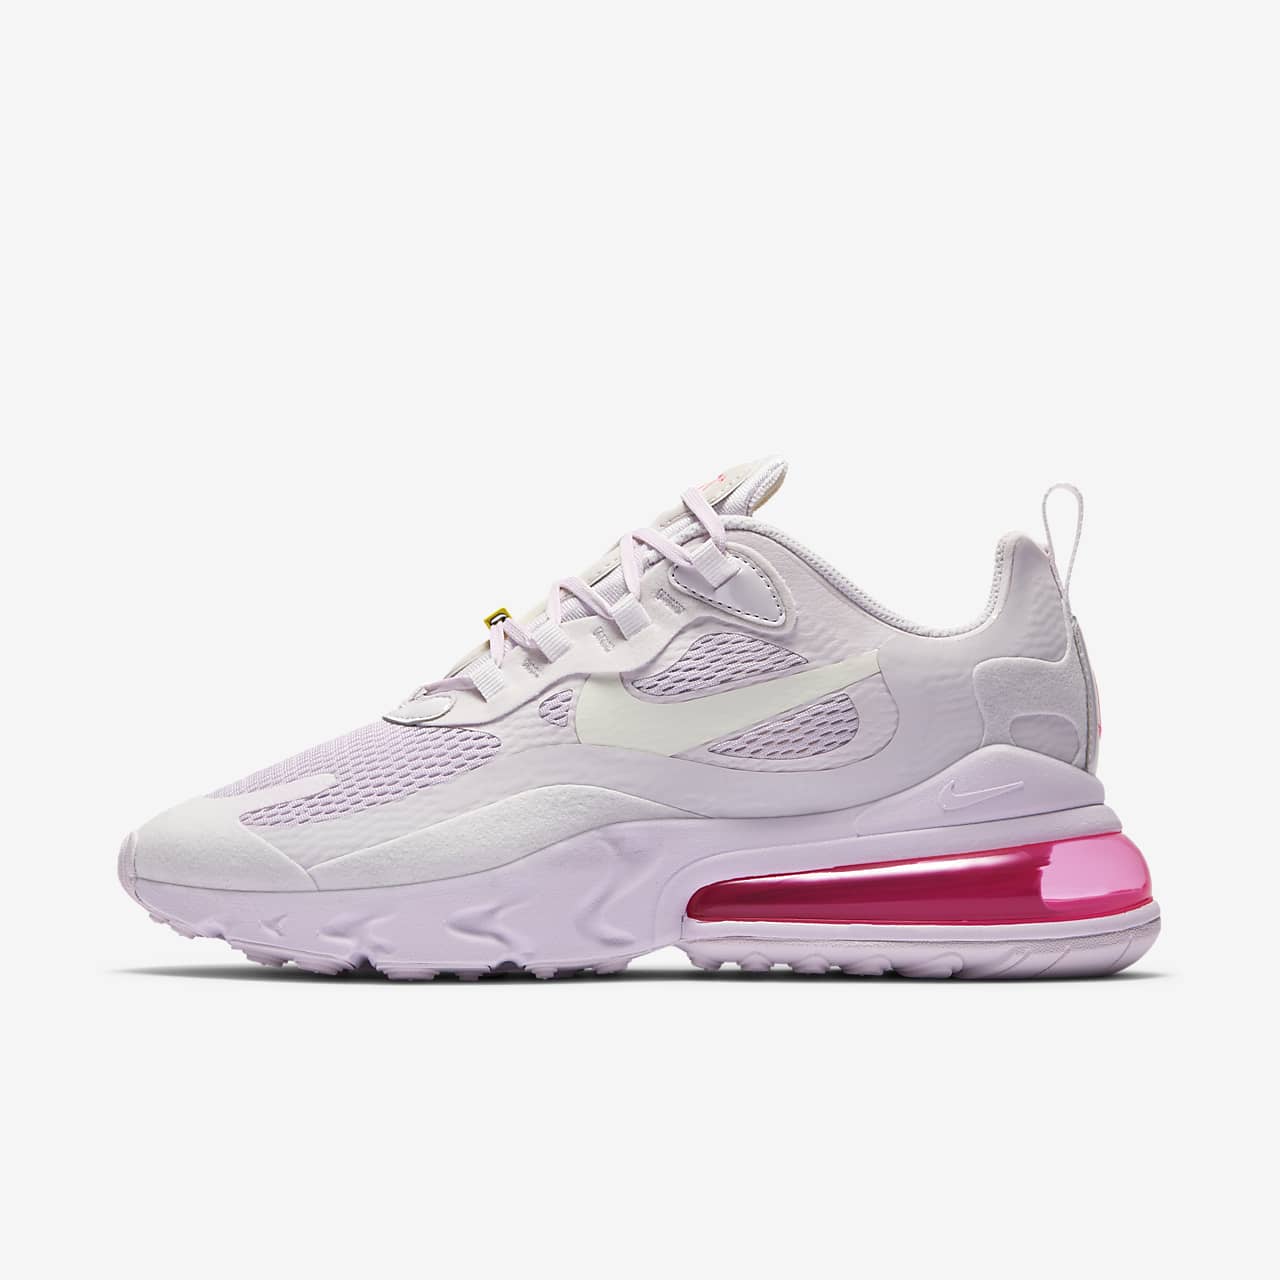 are nike 270 react running shoes